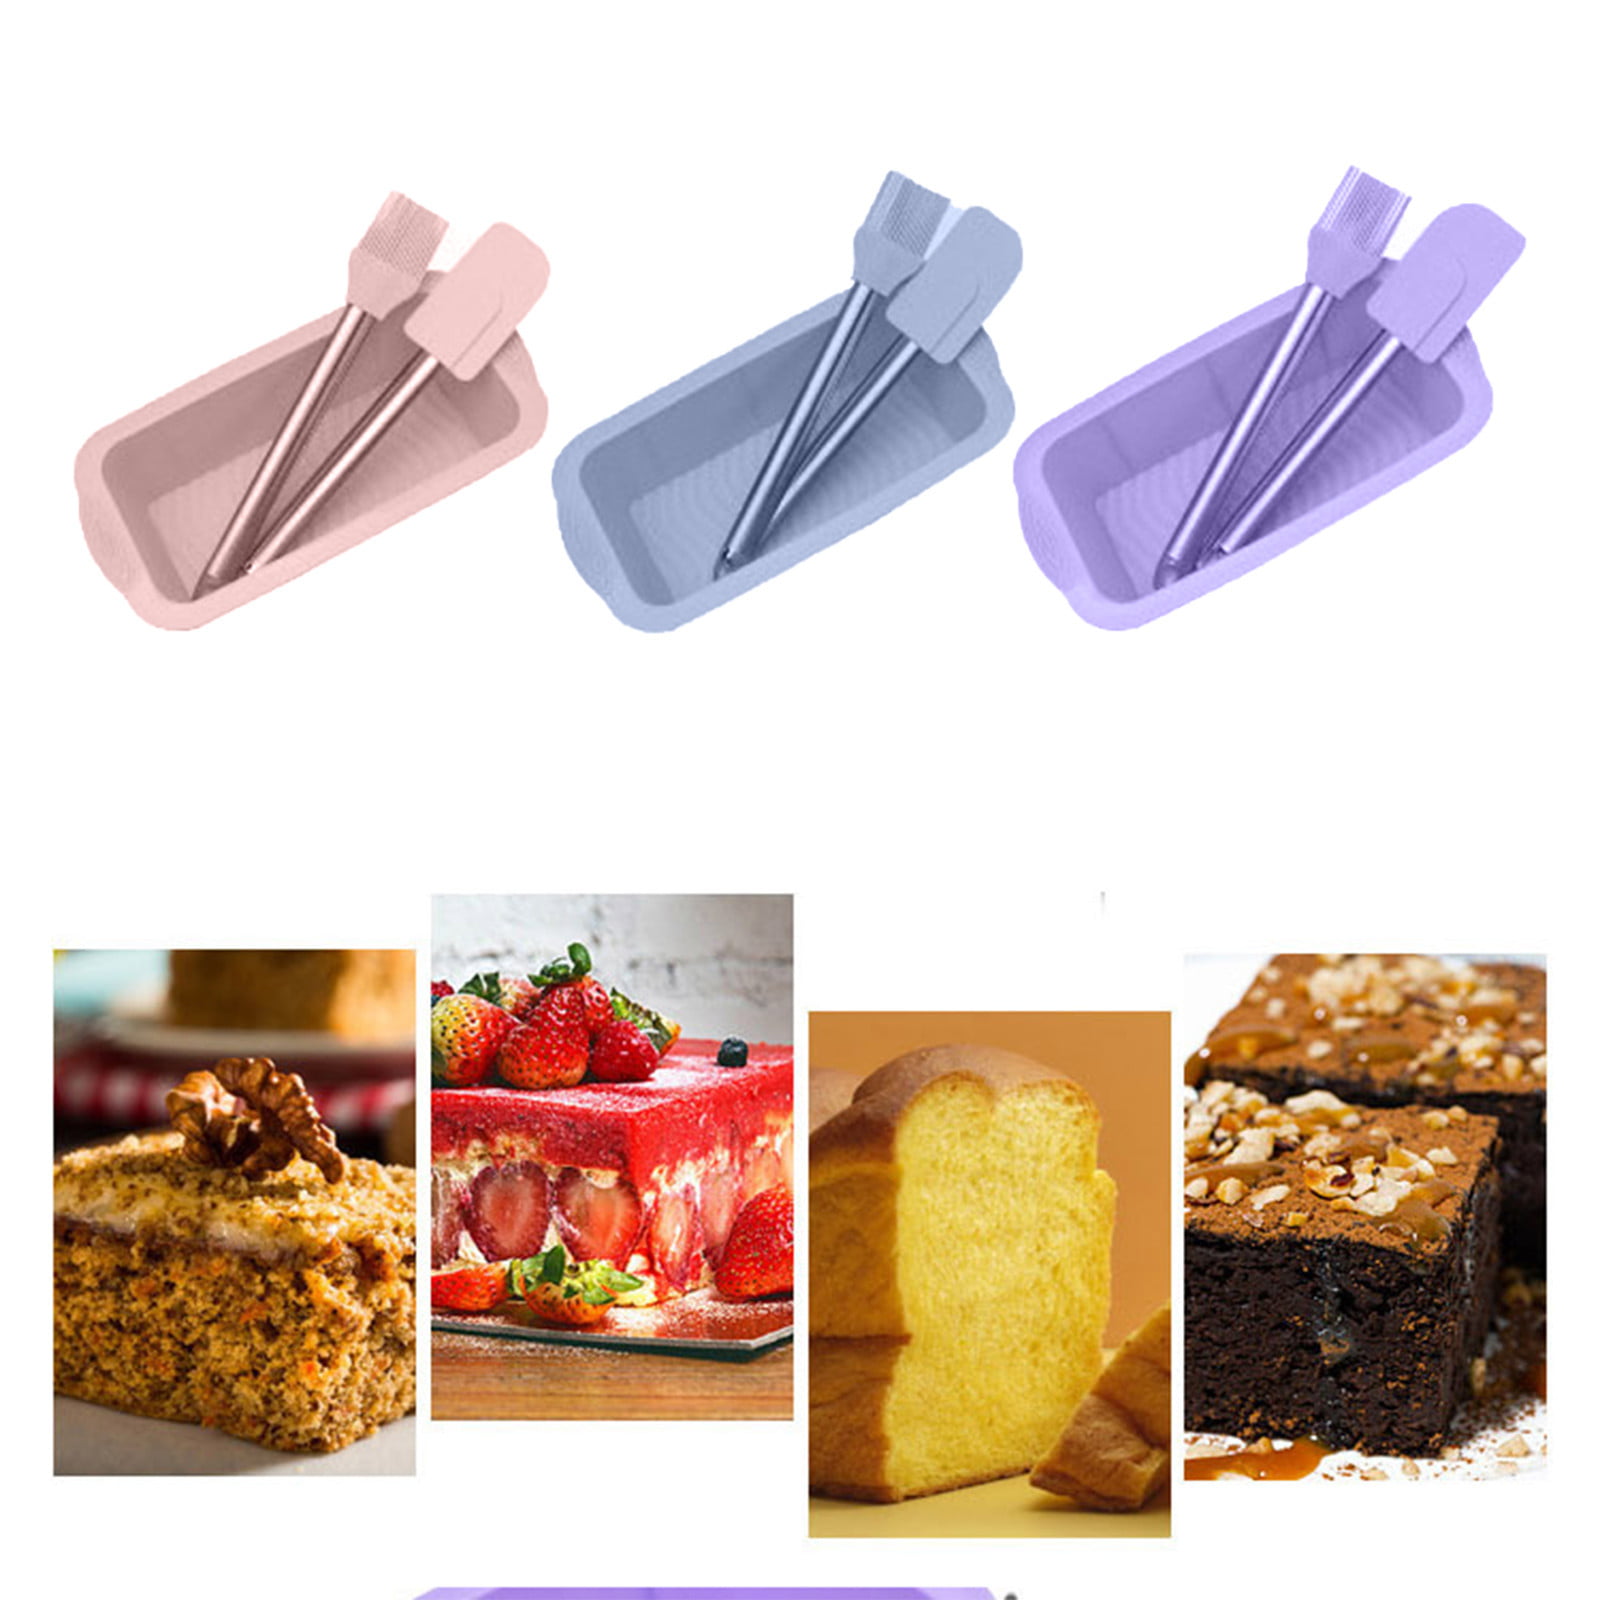 Cake Molds Clearance, Stainless Steel Silicone Baking Set Square Cake Mold Scraper Oil Brush 3Pcs/Set, Blue